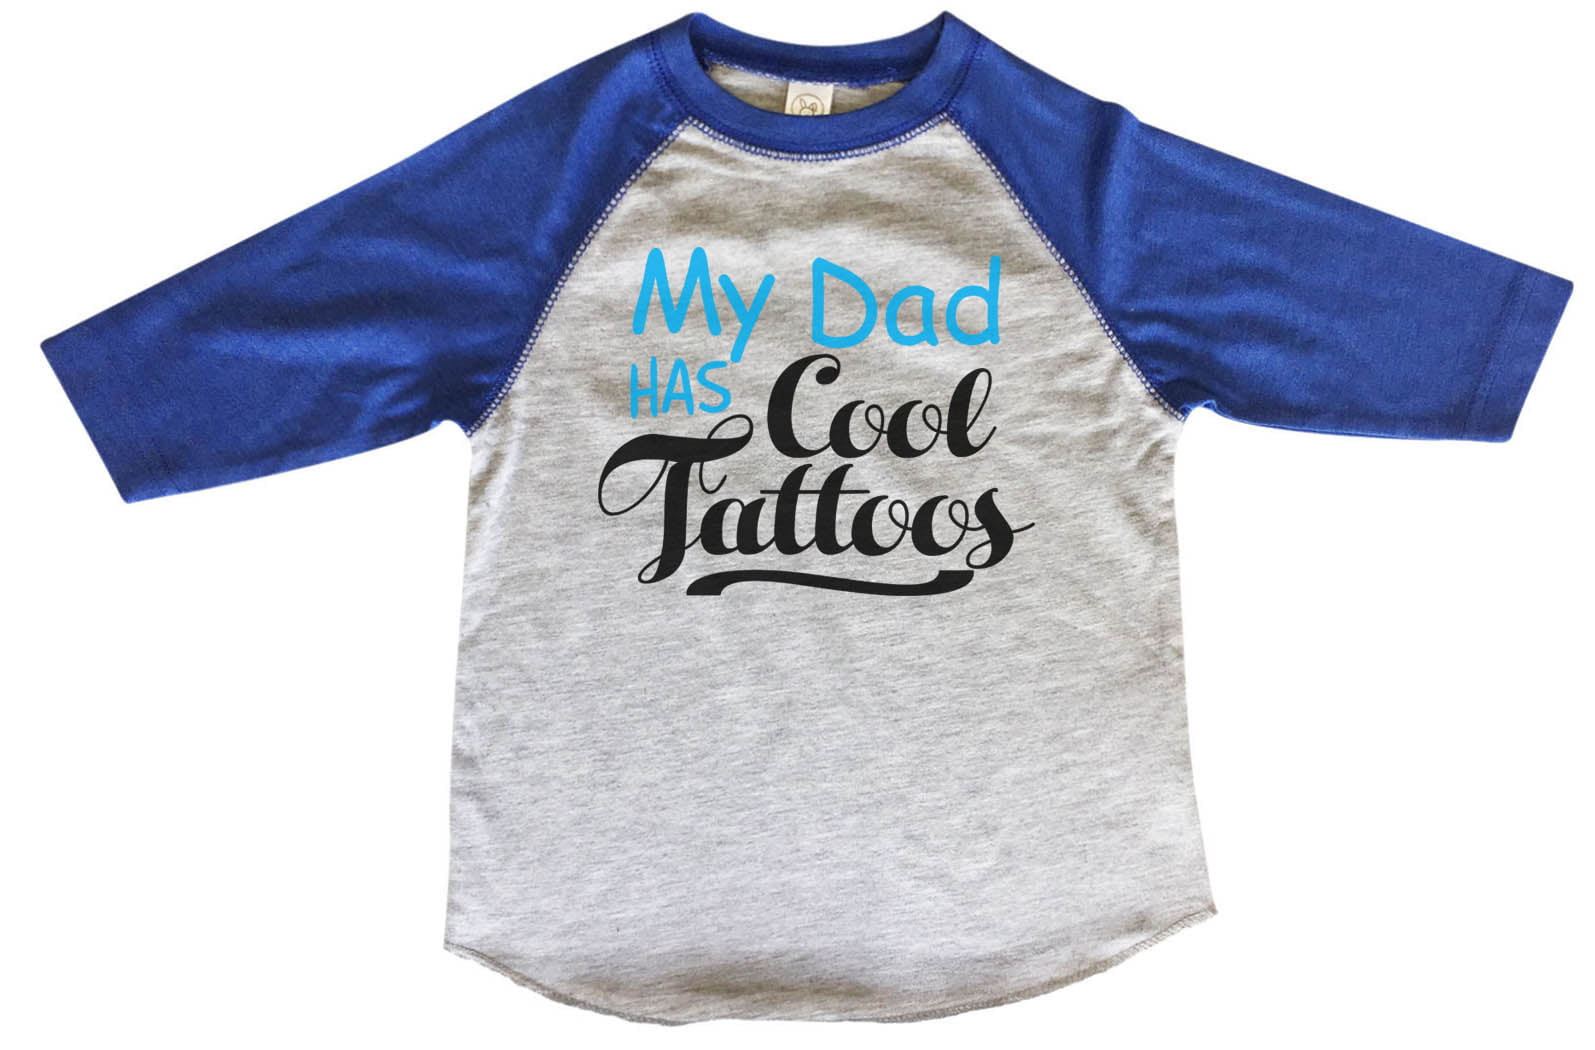 My Dad's Tattoo's Funny T-Shirt Boys Girls Kids Age 3-13 Ideal Gift/Present 